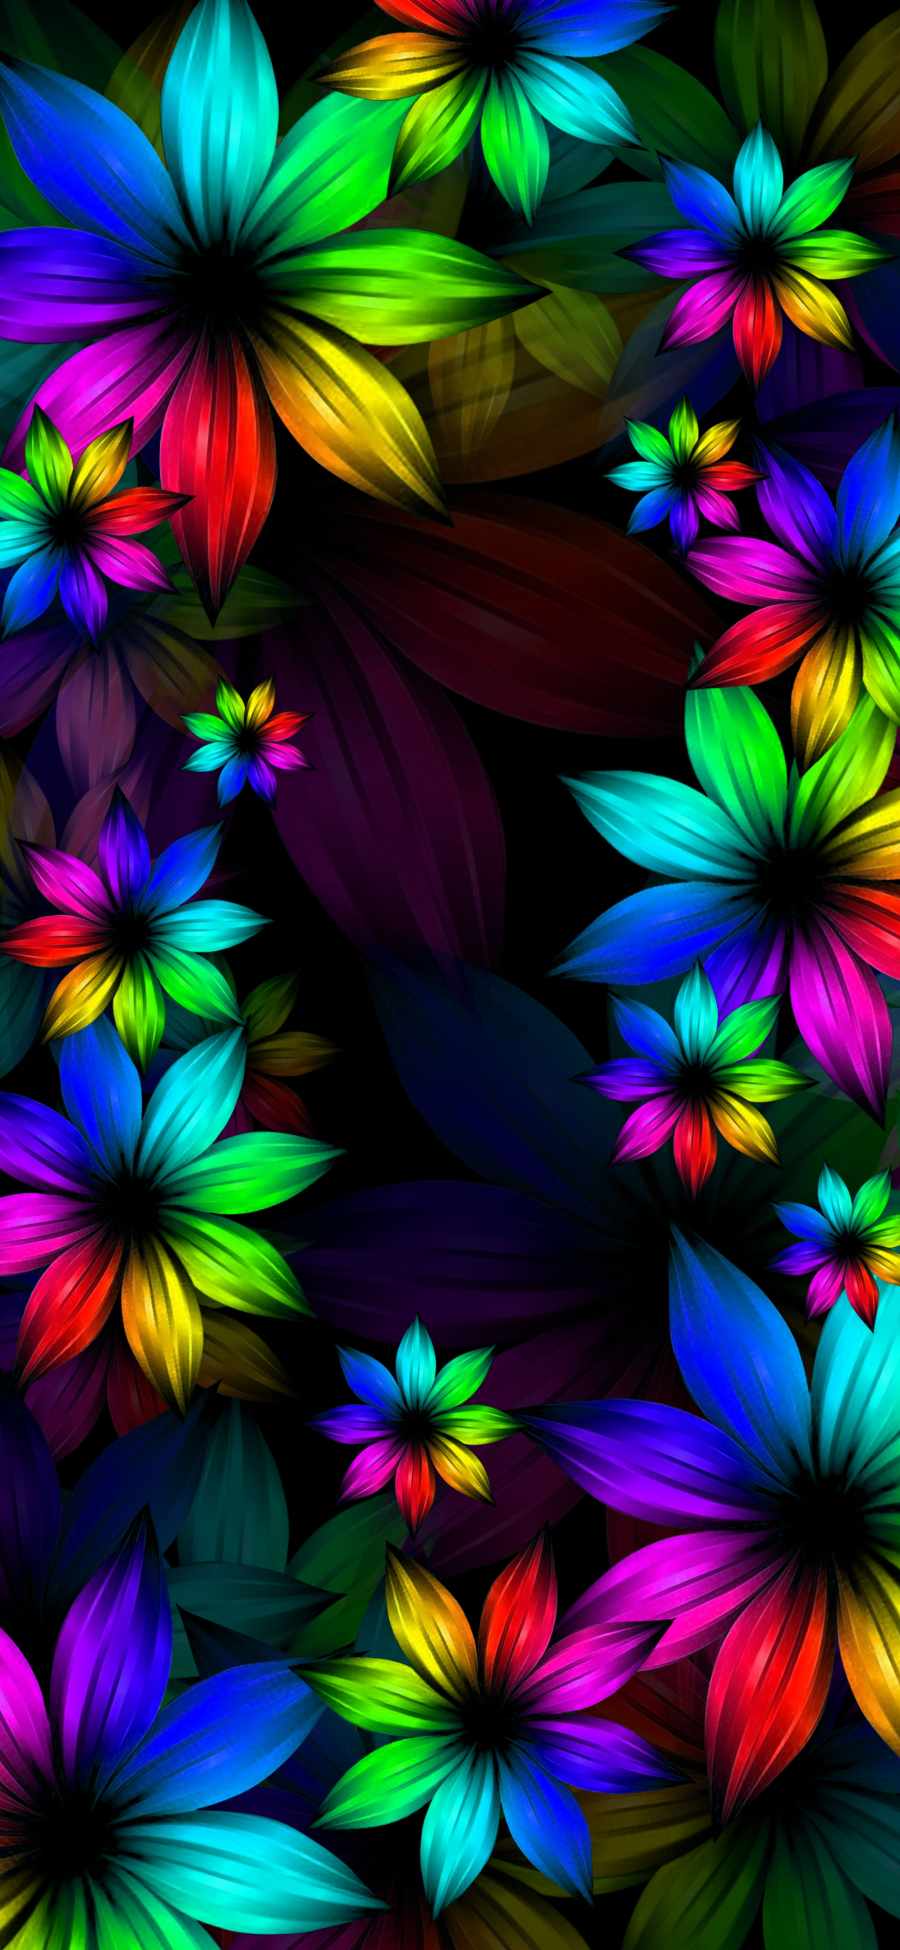 Rainbow Color Flowers iPhone Wallpaper HD